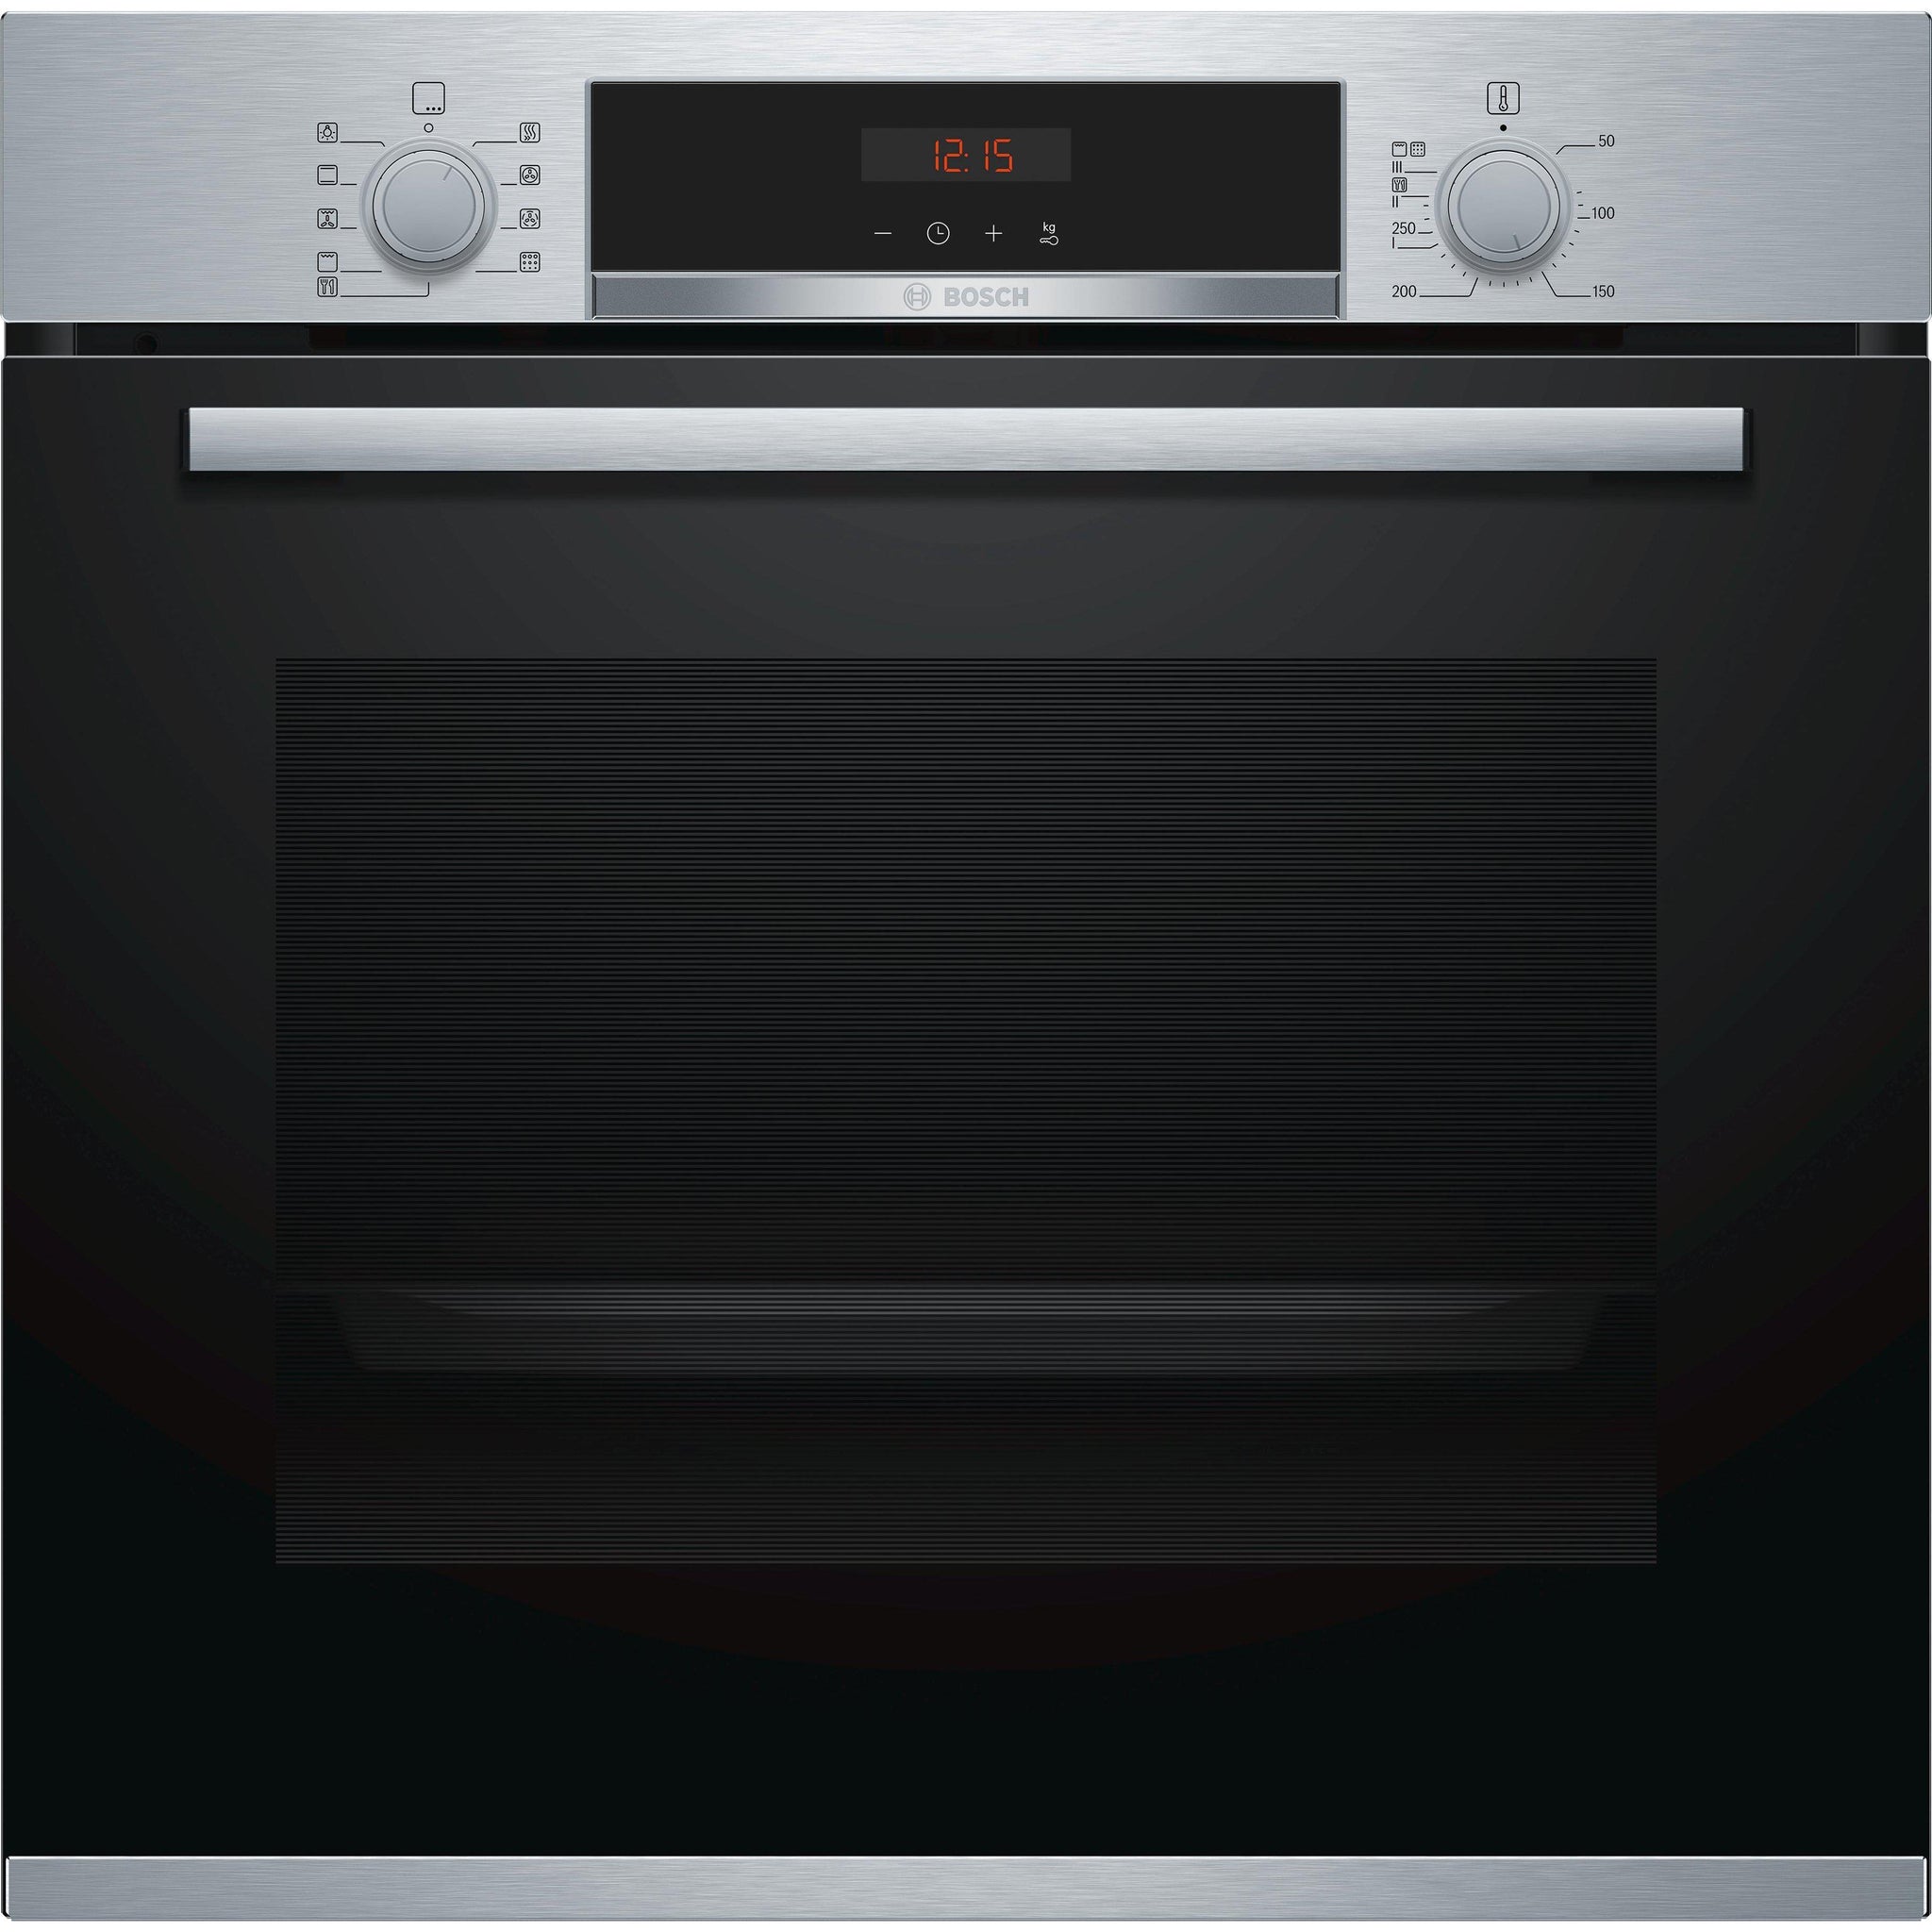 Bosch Hbs573bs0b Serie 4 Builtin Pyrolytic Single Oven Euronics 3 Only At This Price